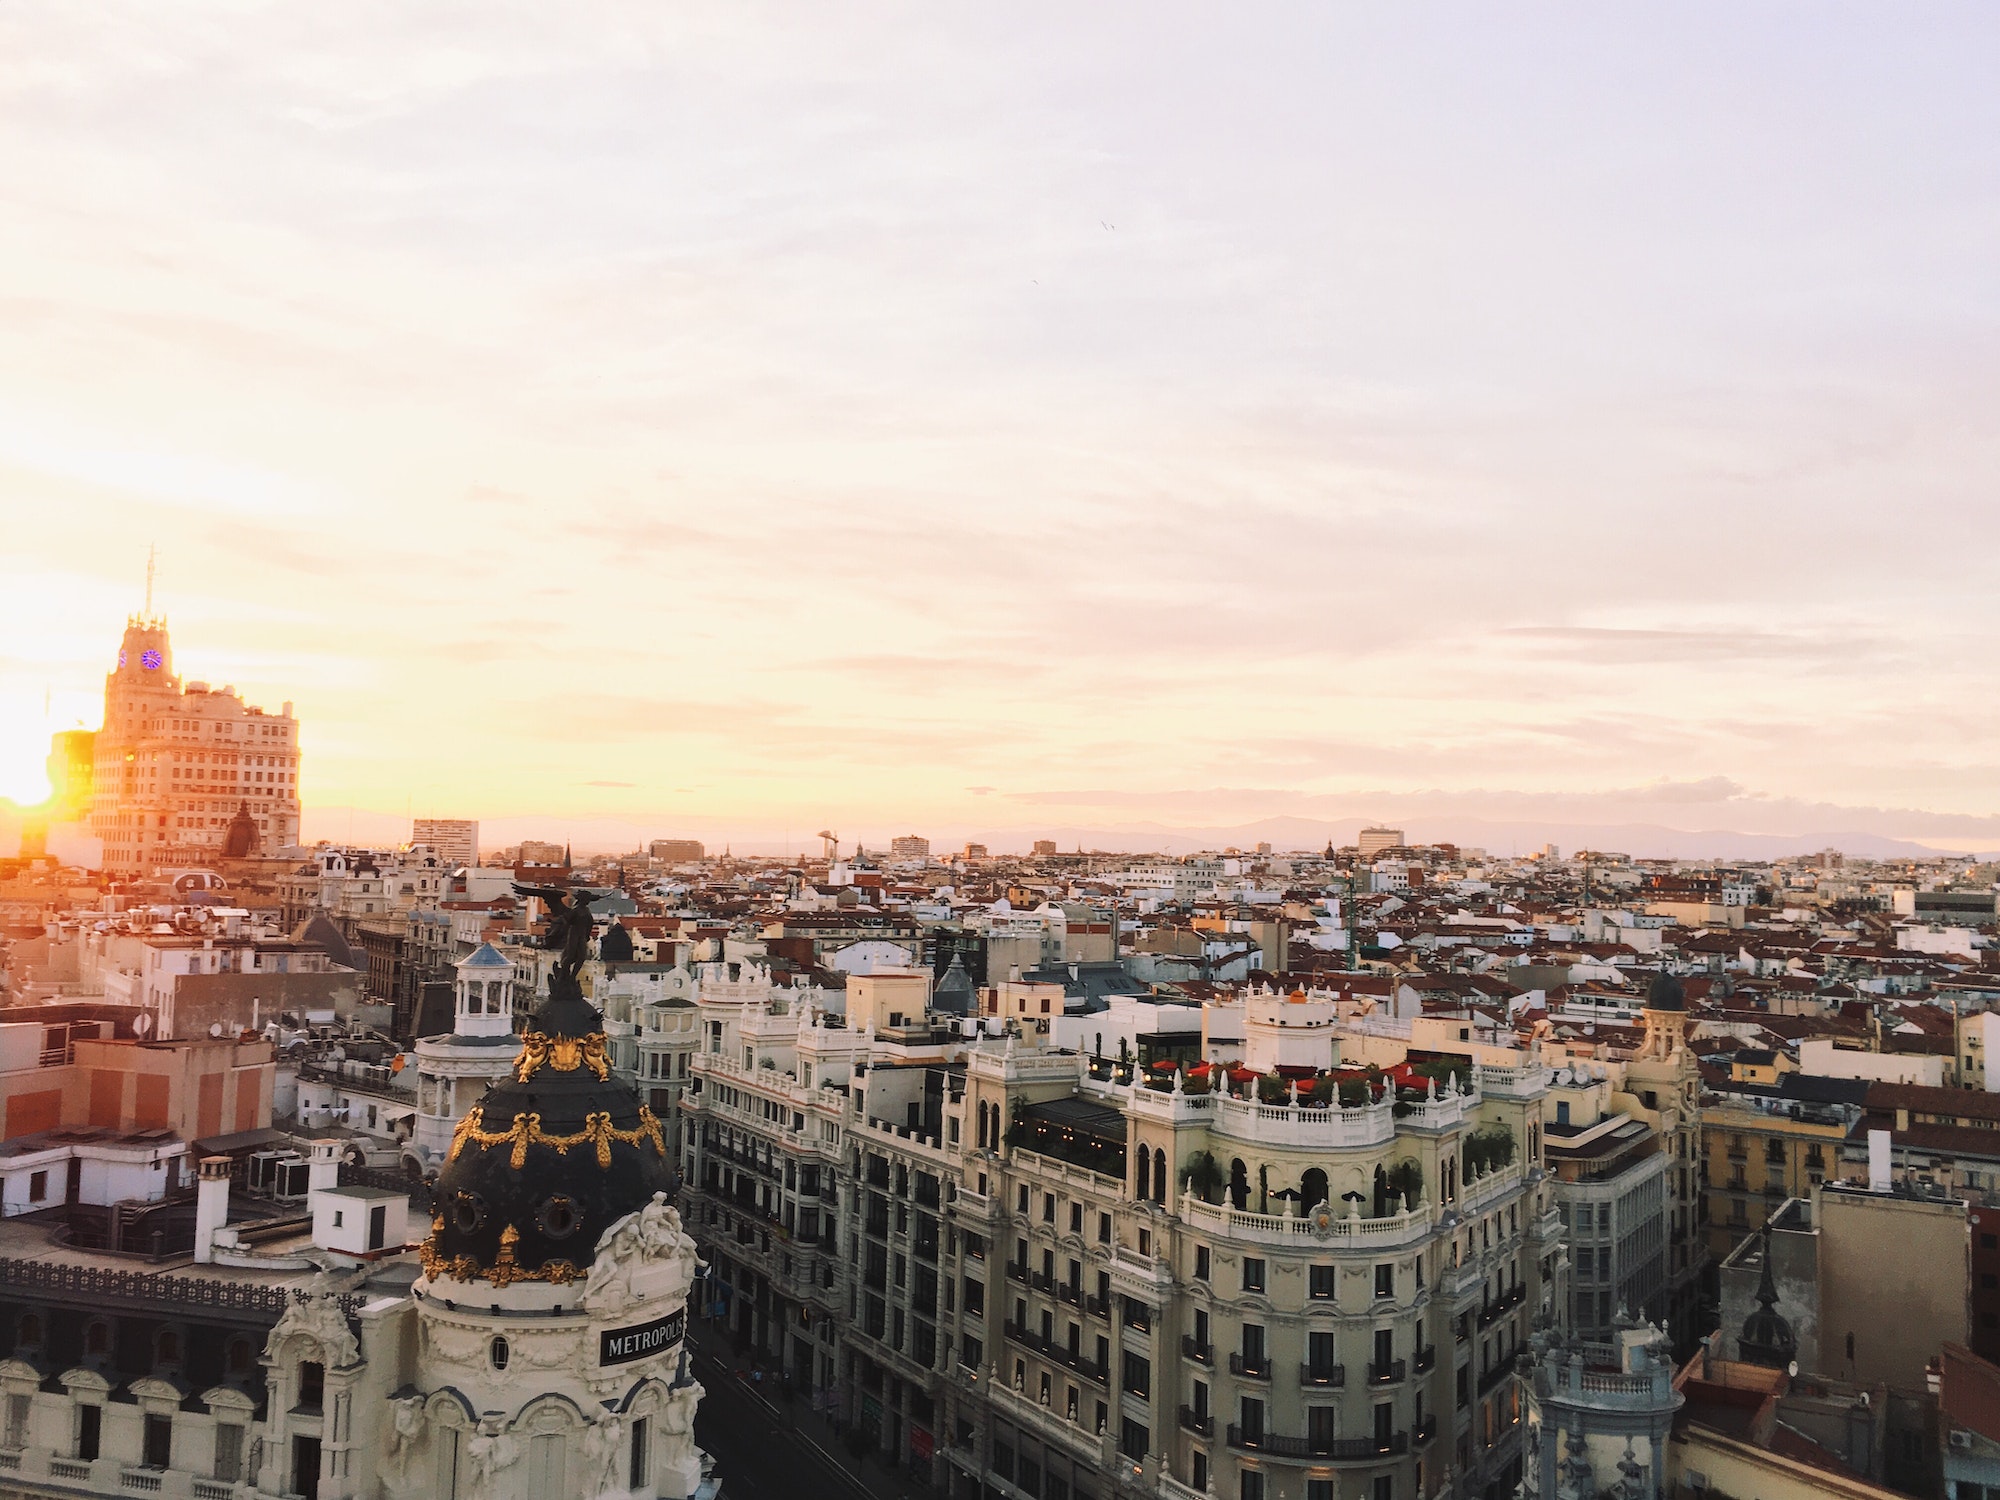 City skyline view at sunset of Madrid in Spain